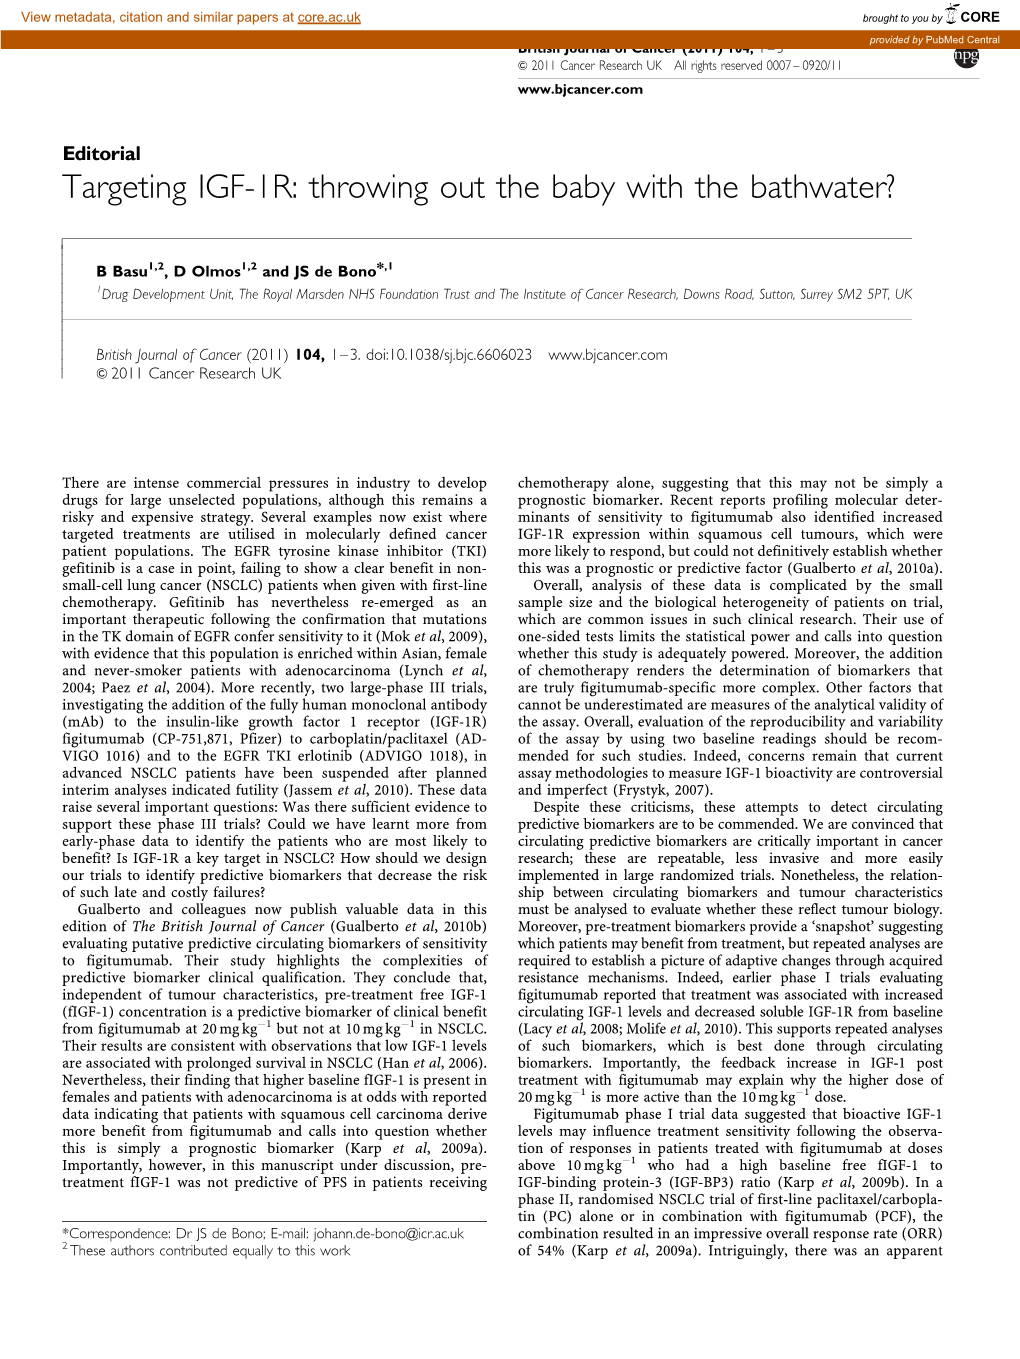 Targeting IGF-1R: Throwing out the Baby with the Bathwater?